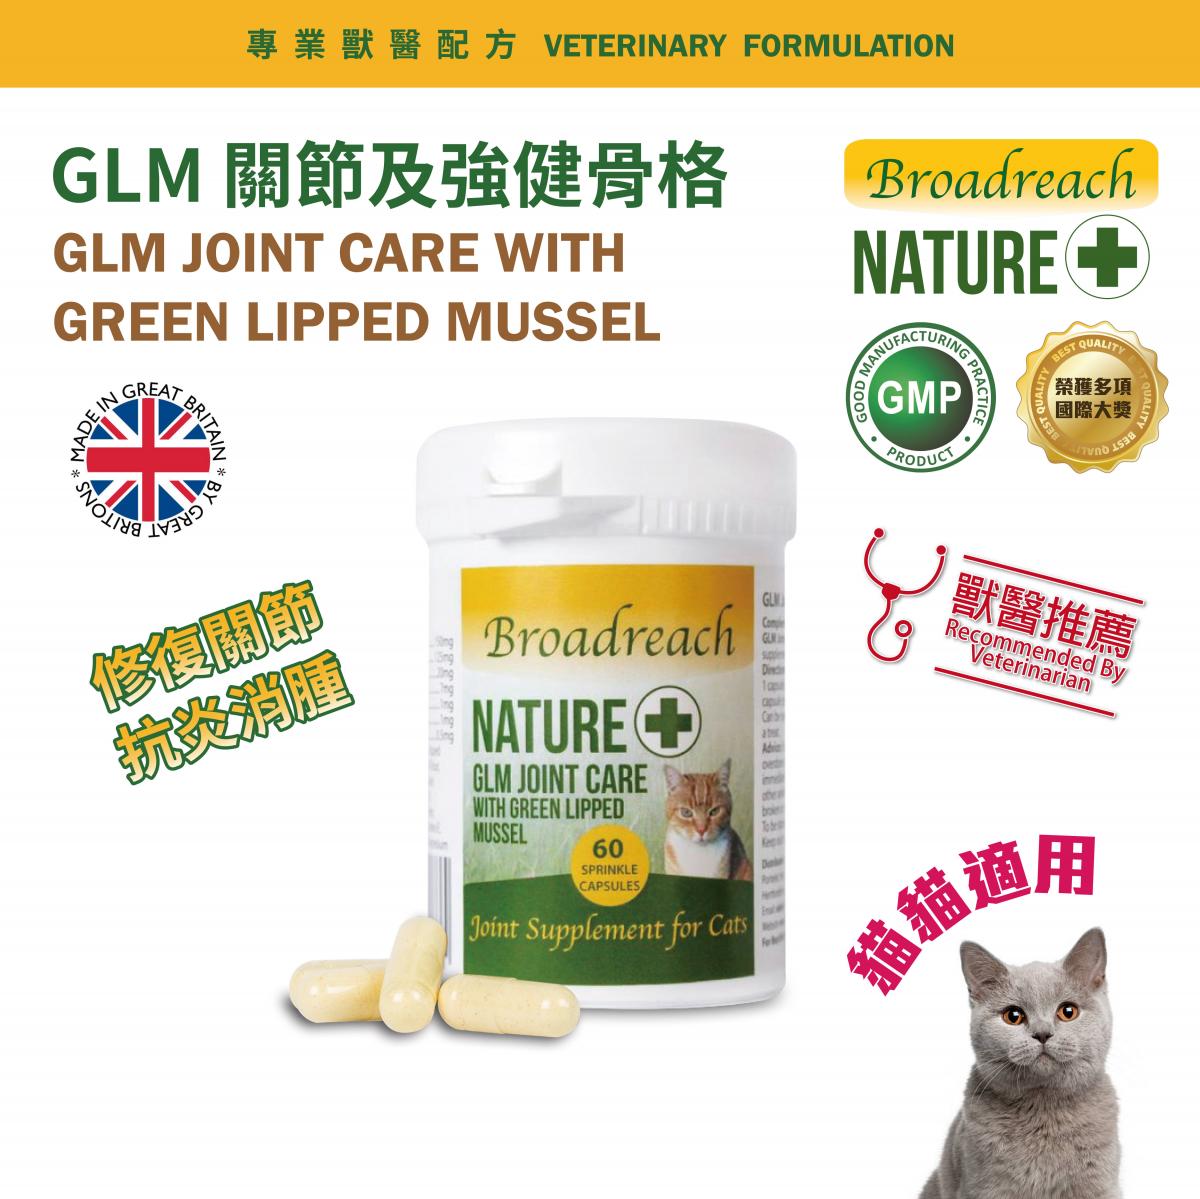 GLM JOINT CARE WITH GREEN LIPPED MUSSEL(Cats) - BRCJ-GC060C - Best Before: 30 Dec 2025